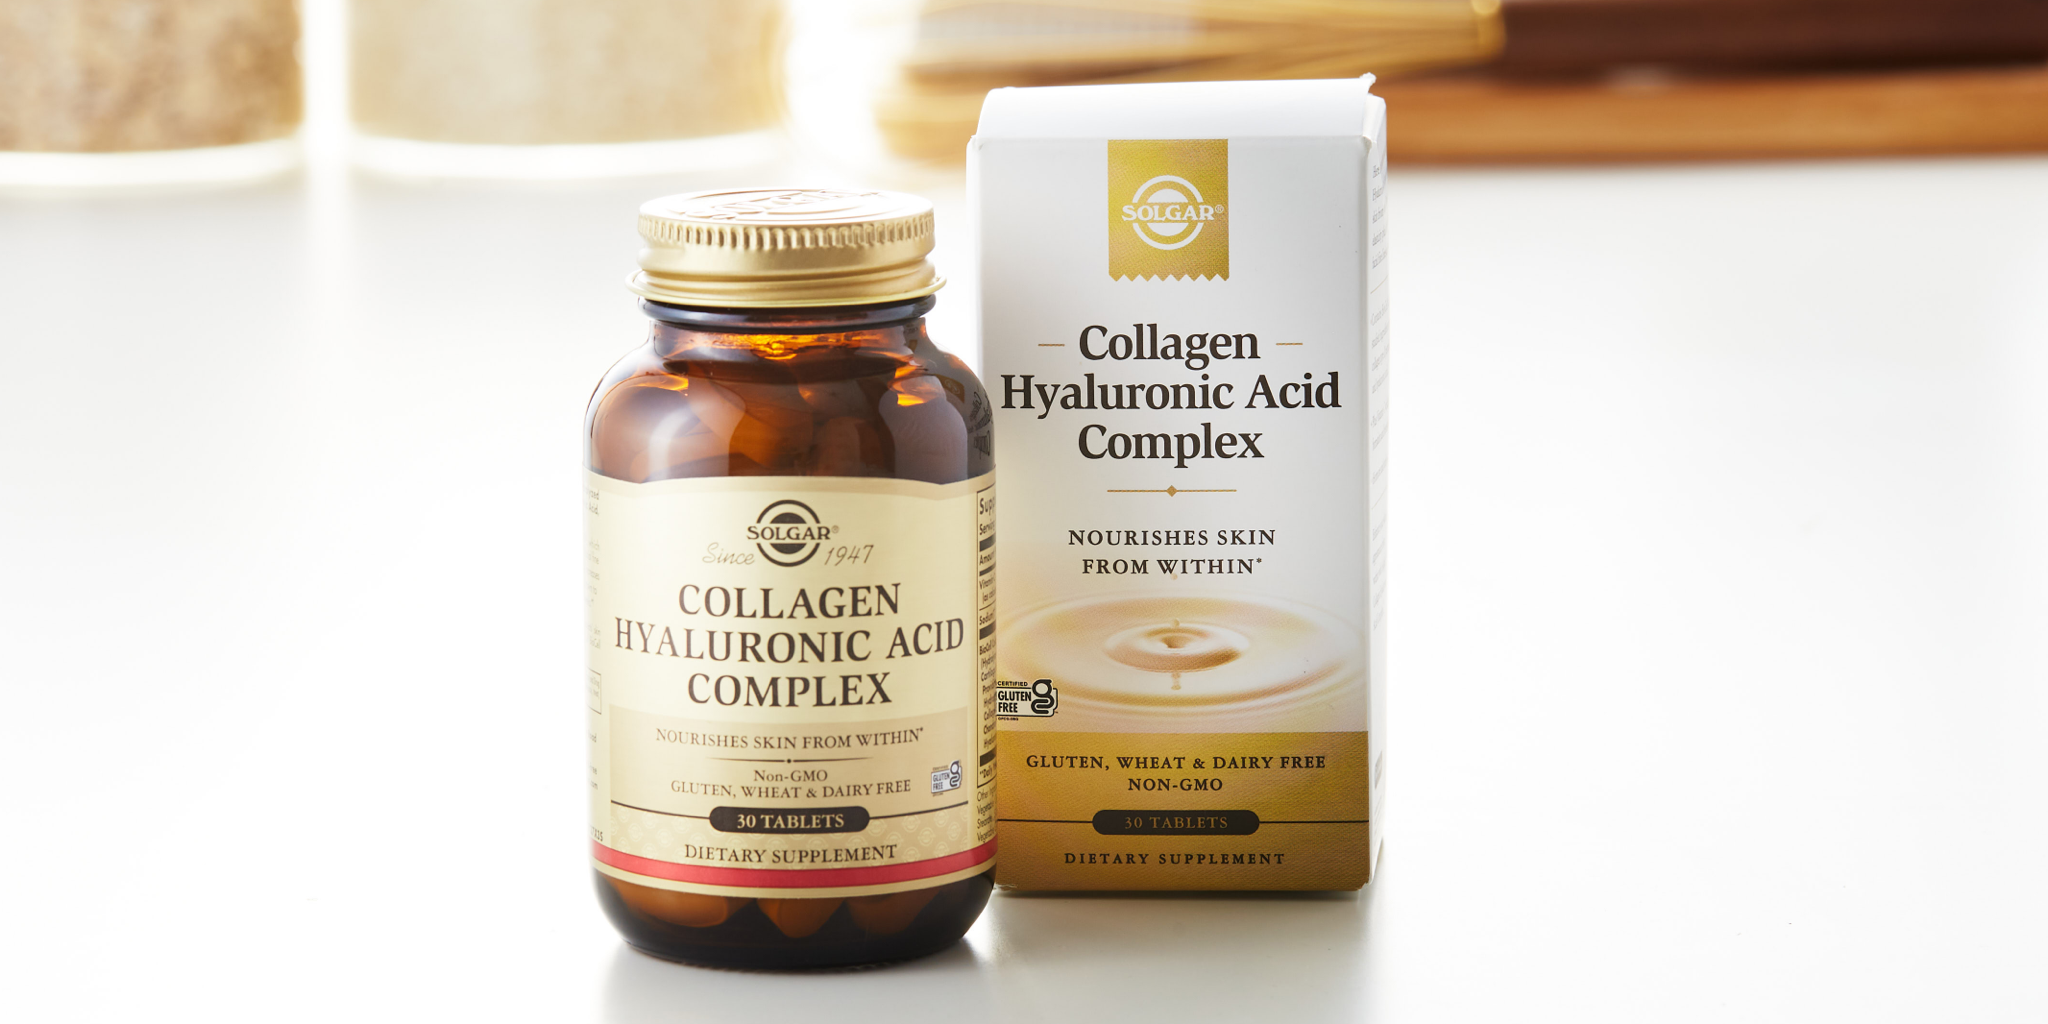 A box and bottle of Solgar Collagen Hyaluronic Acid Complex tablets on a white countertop, in front of jars of kitchen items.